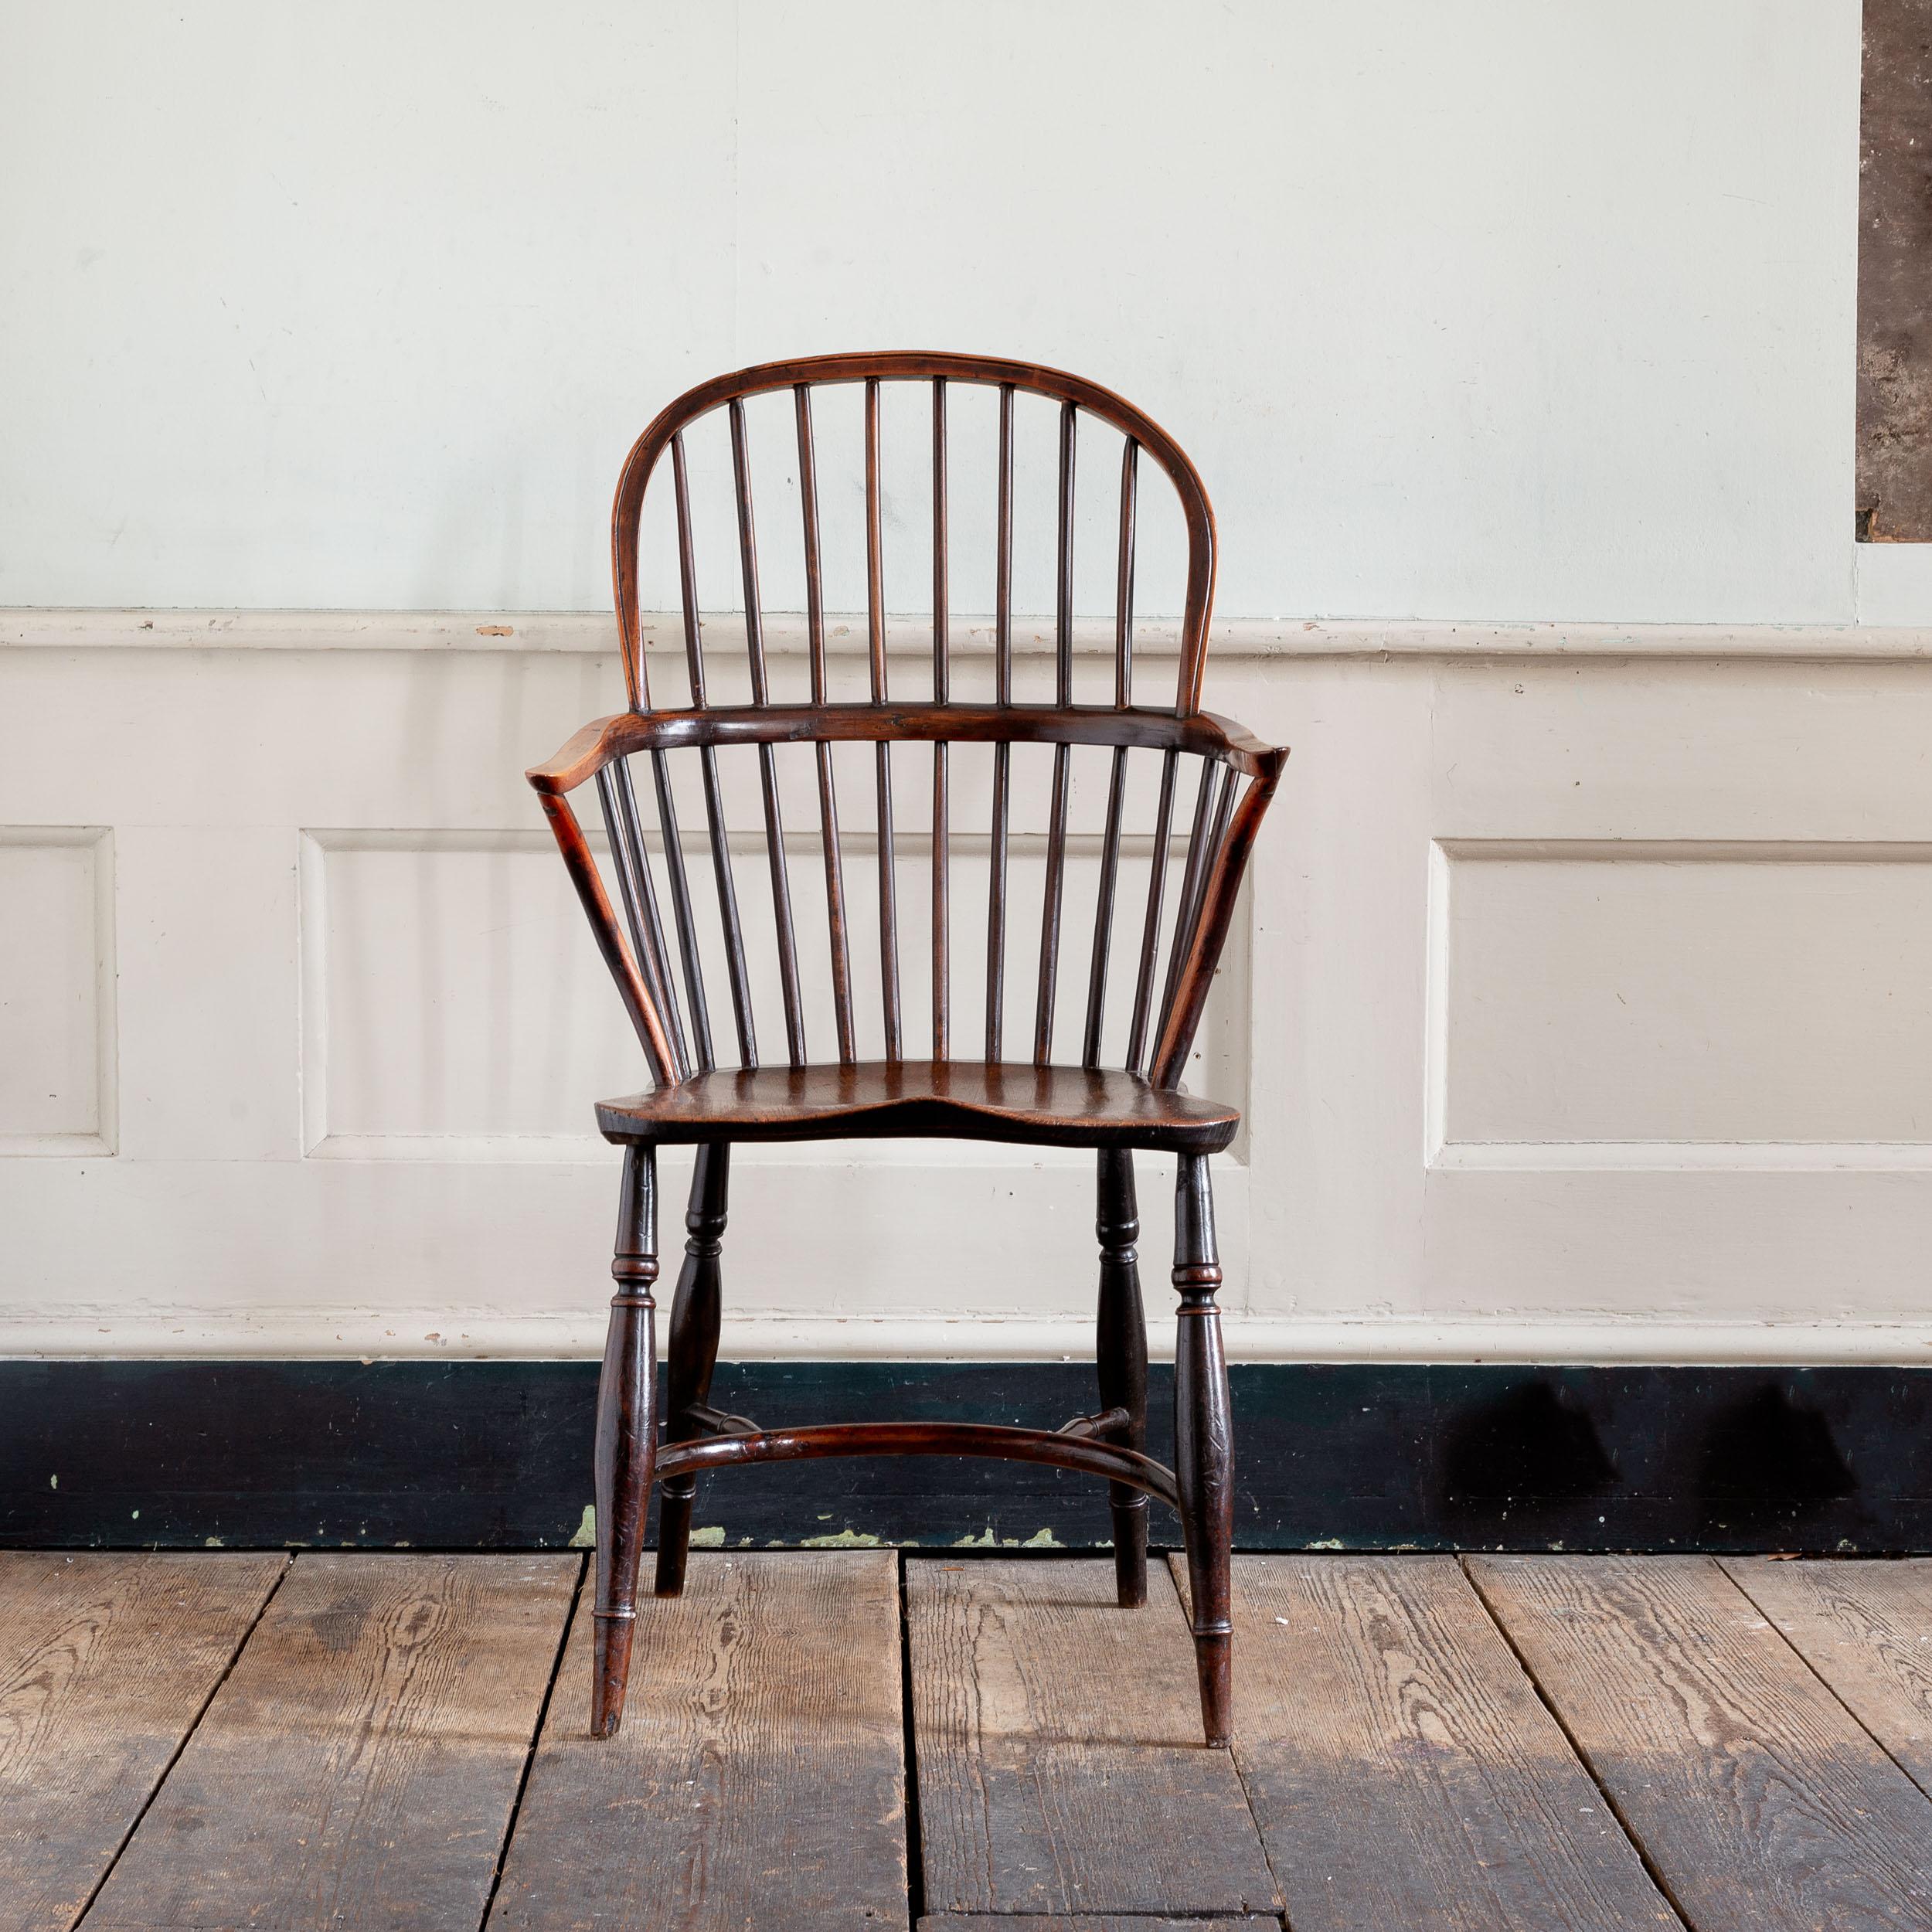 Early 19th century Windsor armchair, Thames Valley, Yew, with Elm seat. A pleasing, simple and unfussy example of English Country furniture in a variety of indigenous timbers, with refined turned elements to the under-carriage and well patinated